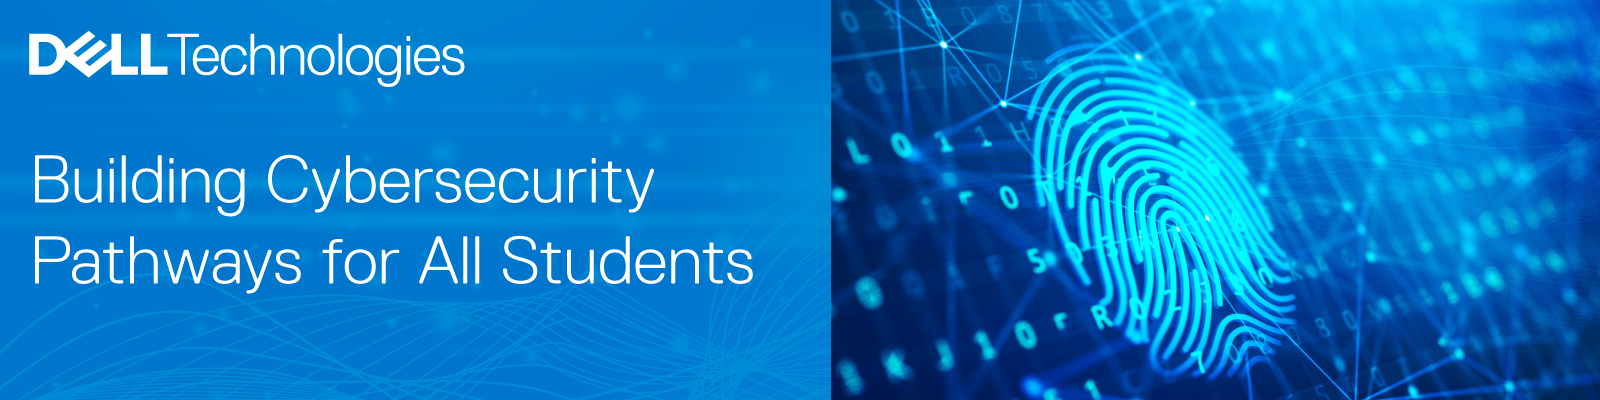 Building Cybersecurity Pathways for All Students